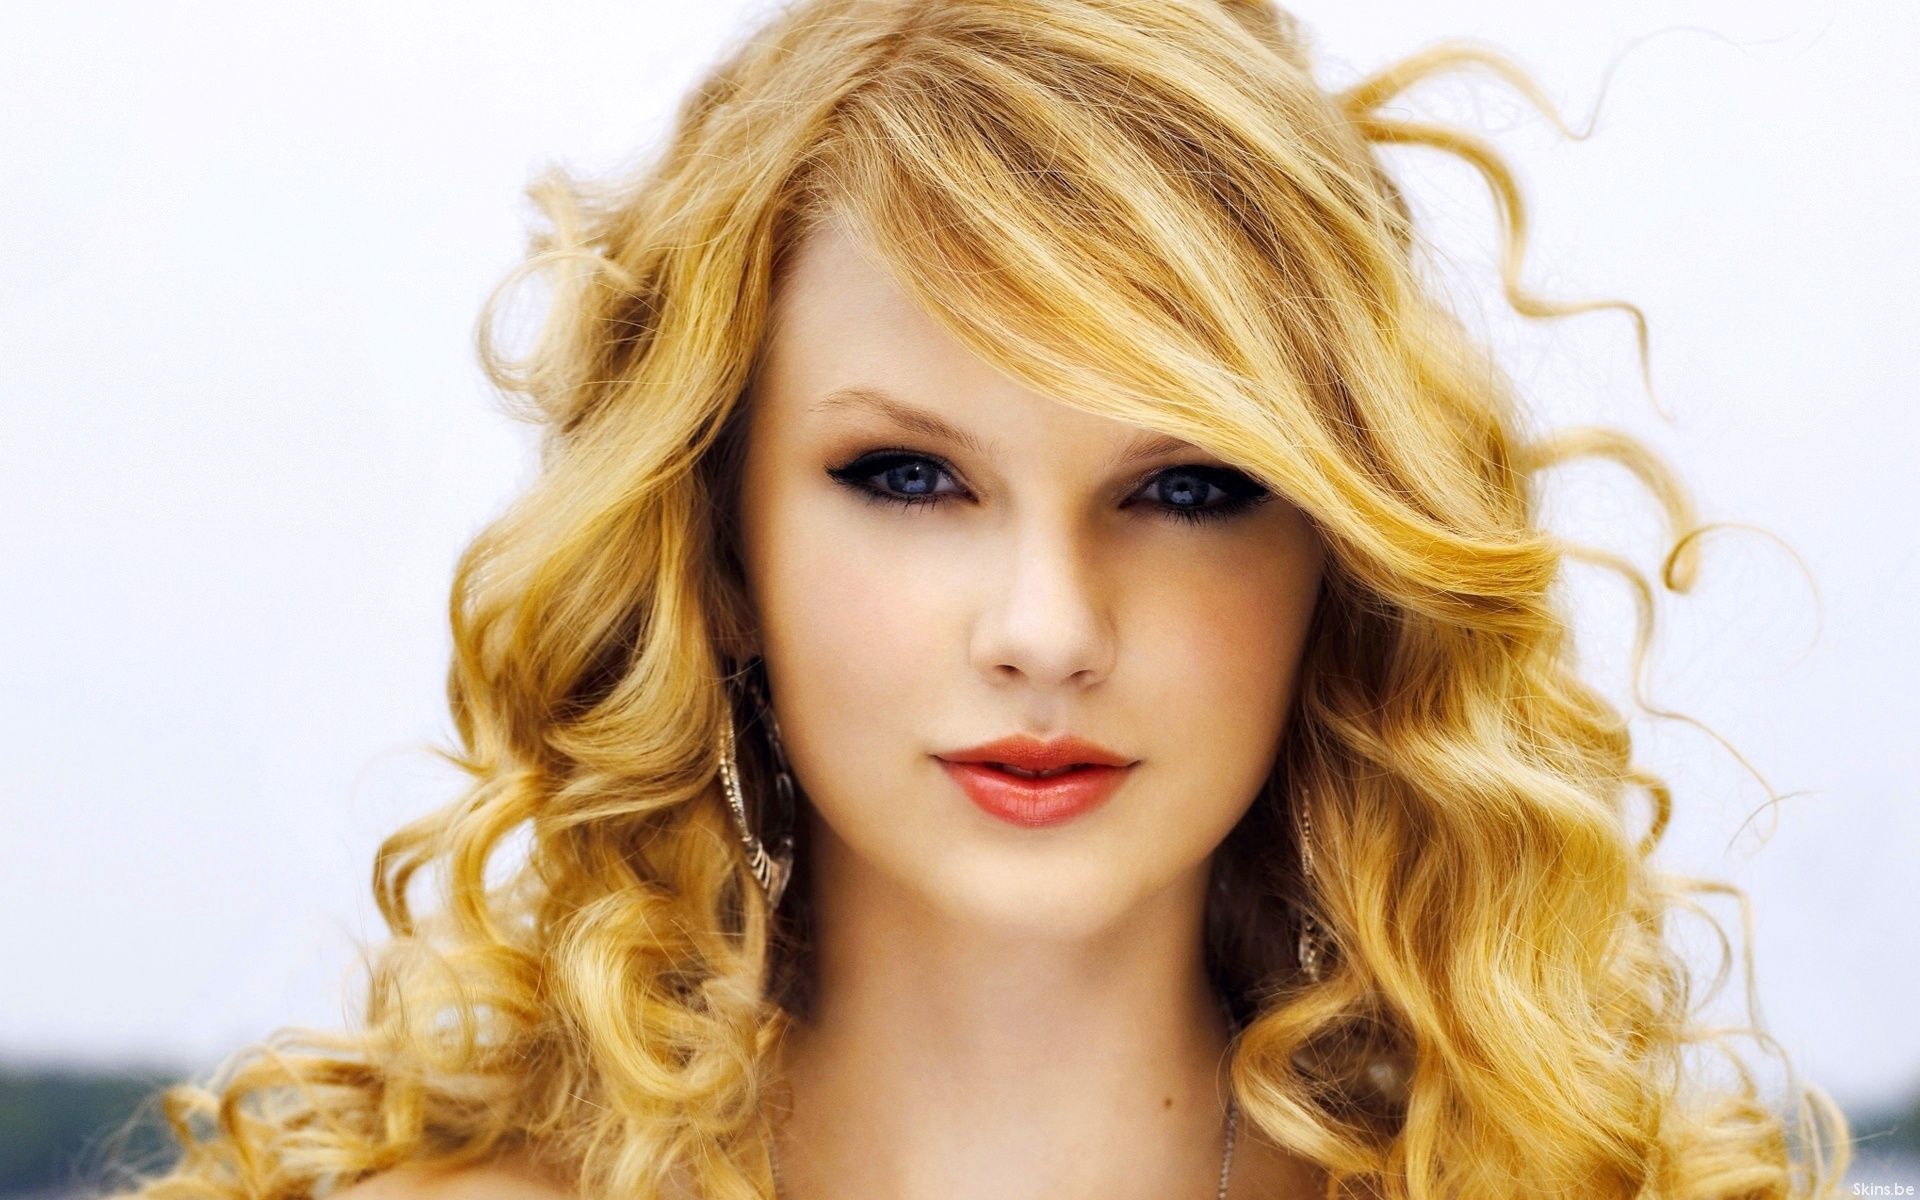 Taylor Swift HD Wallpapers - HD Wallpapers of Taylor Swift - Page